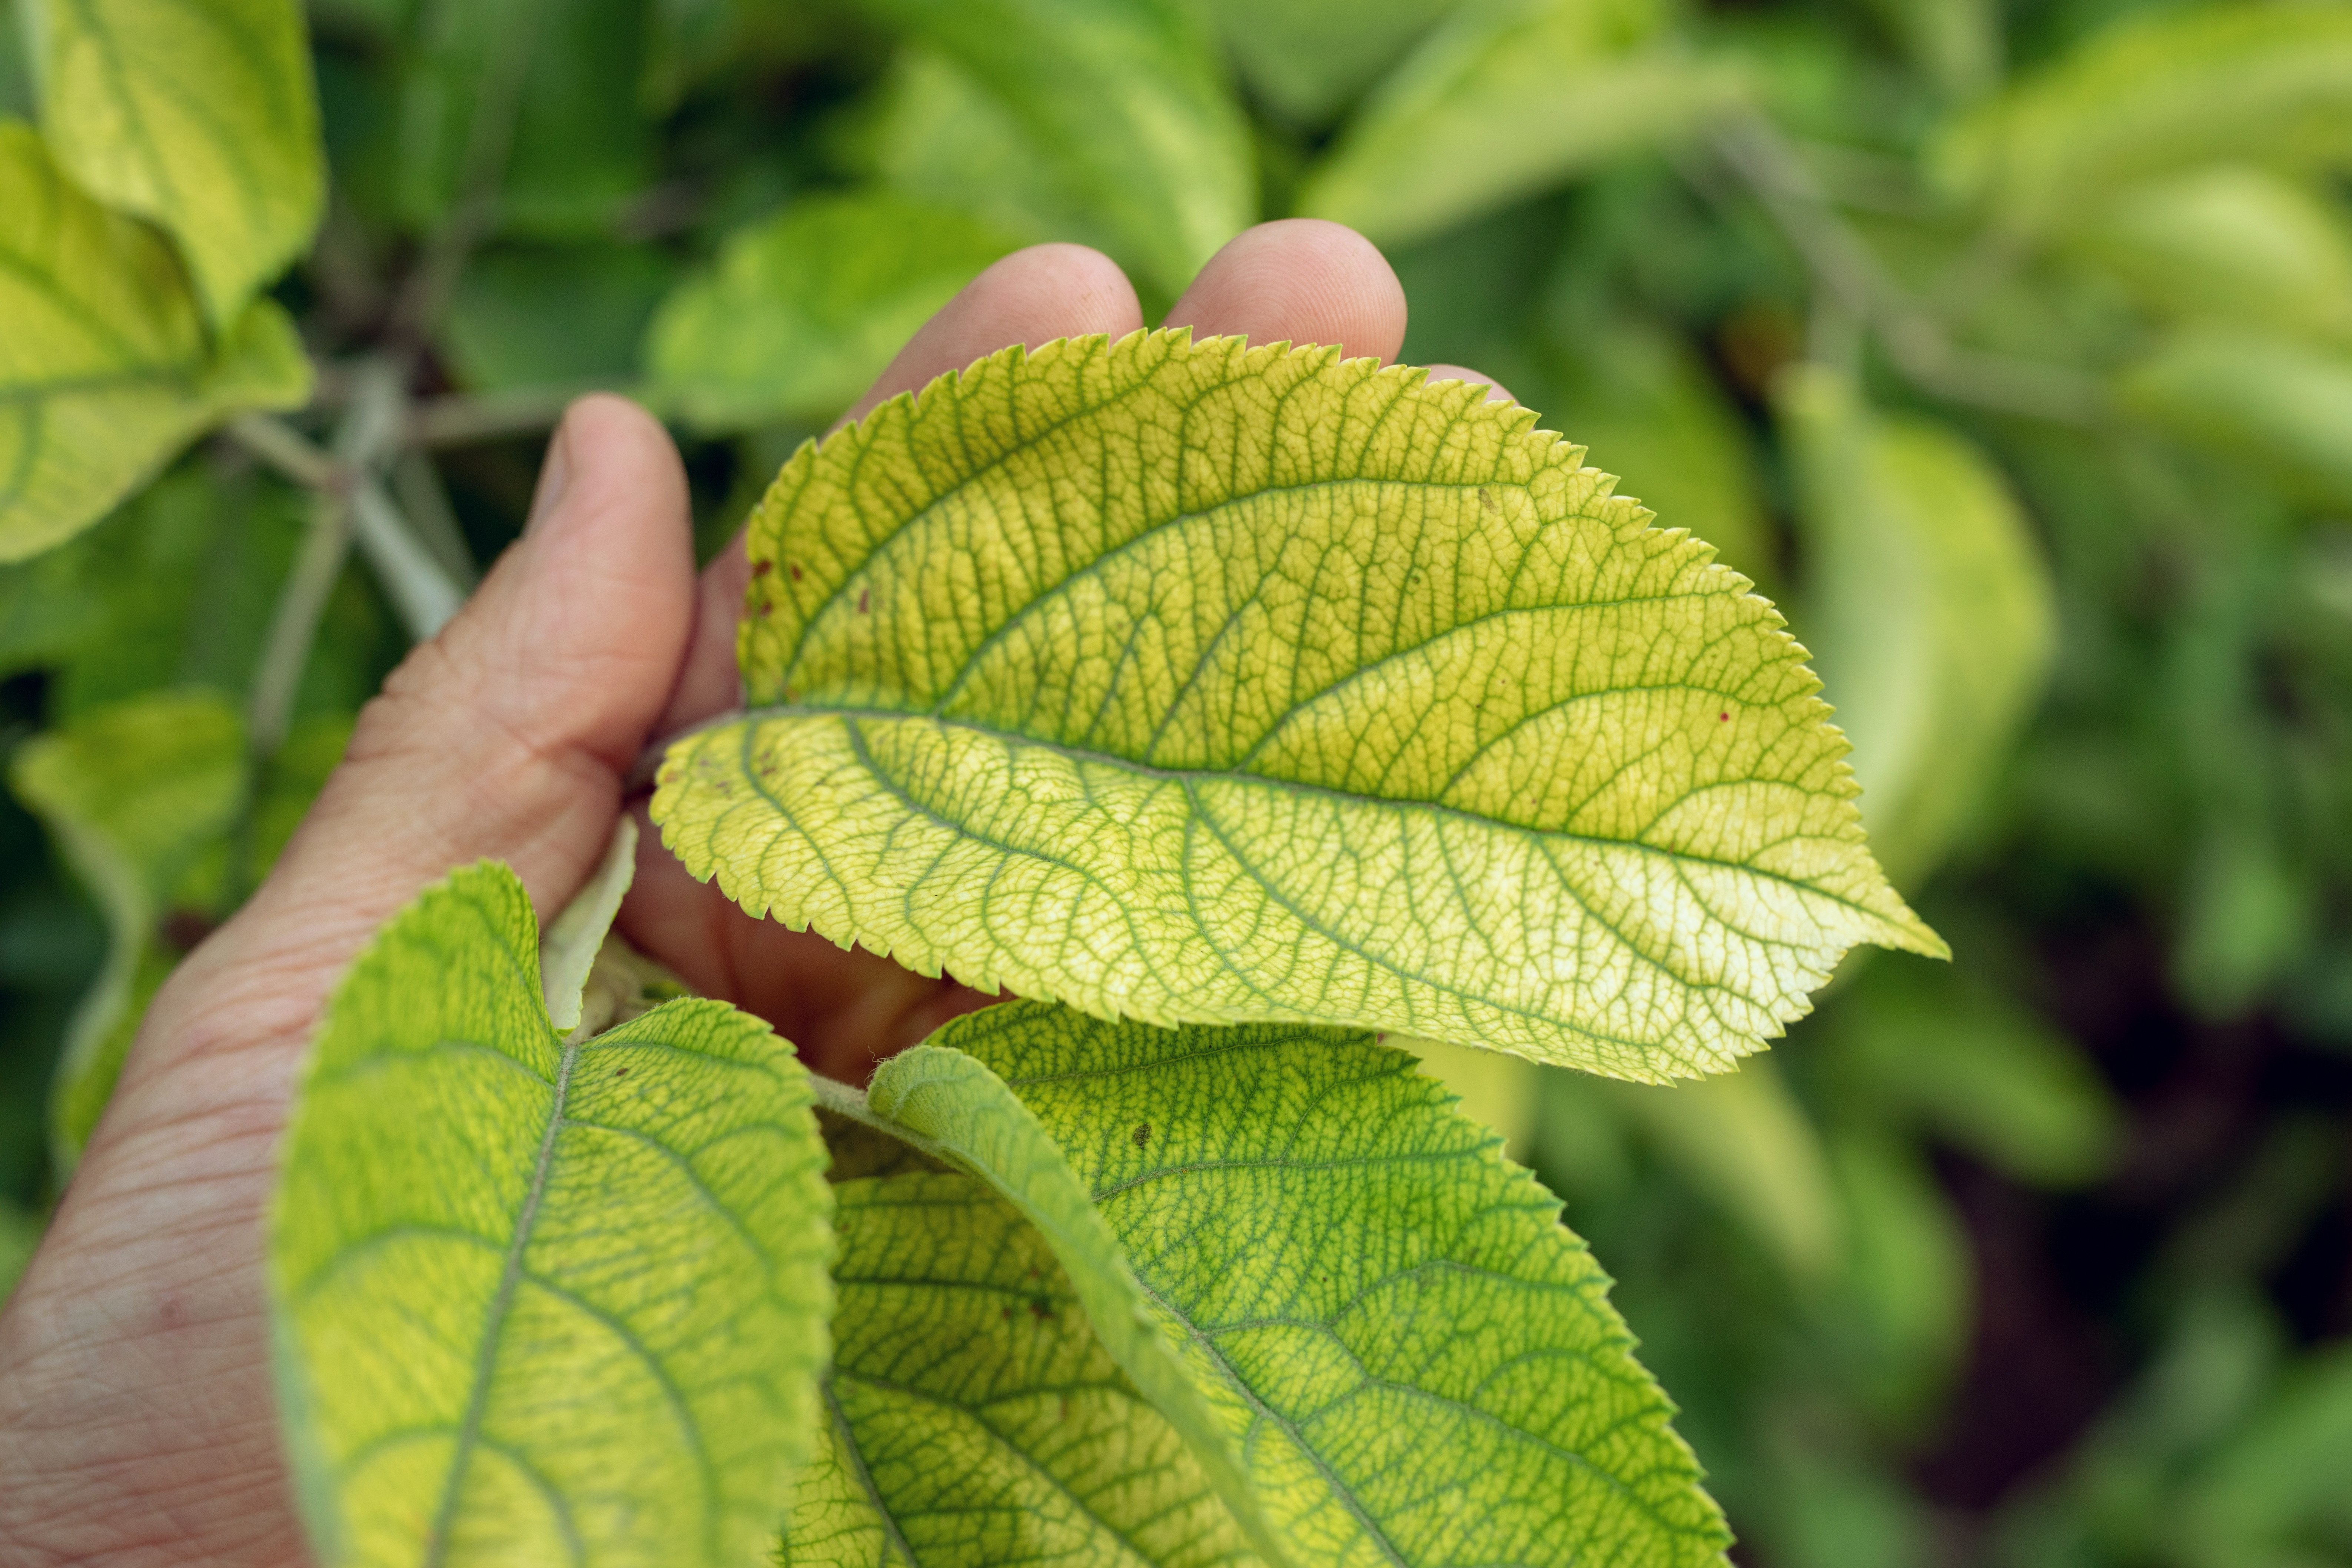 Interveinal chlorosis is a common sign of a nutrient deficiency